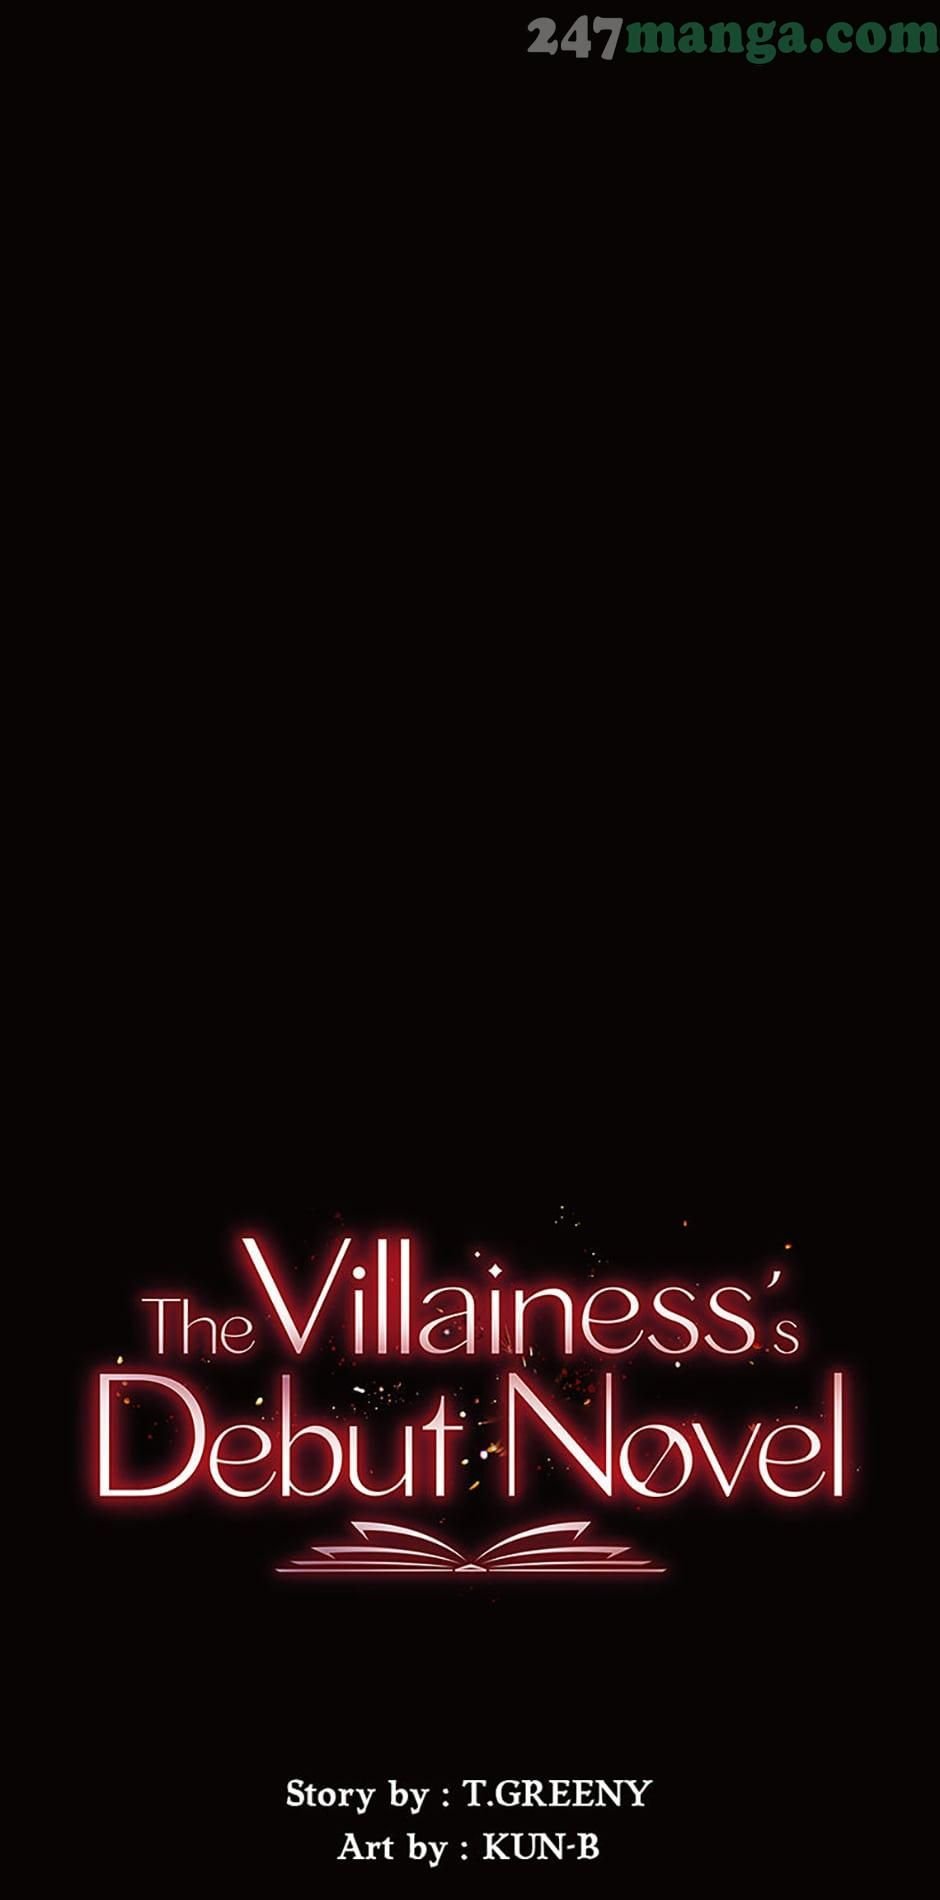 The Villainess’s Debut chapter 24